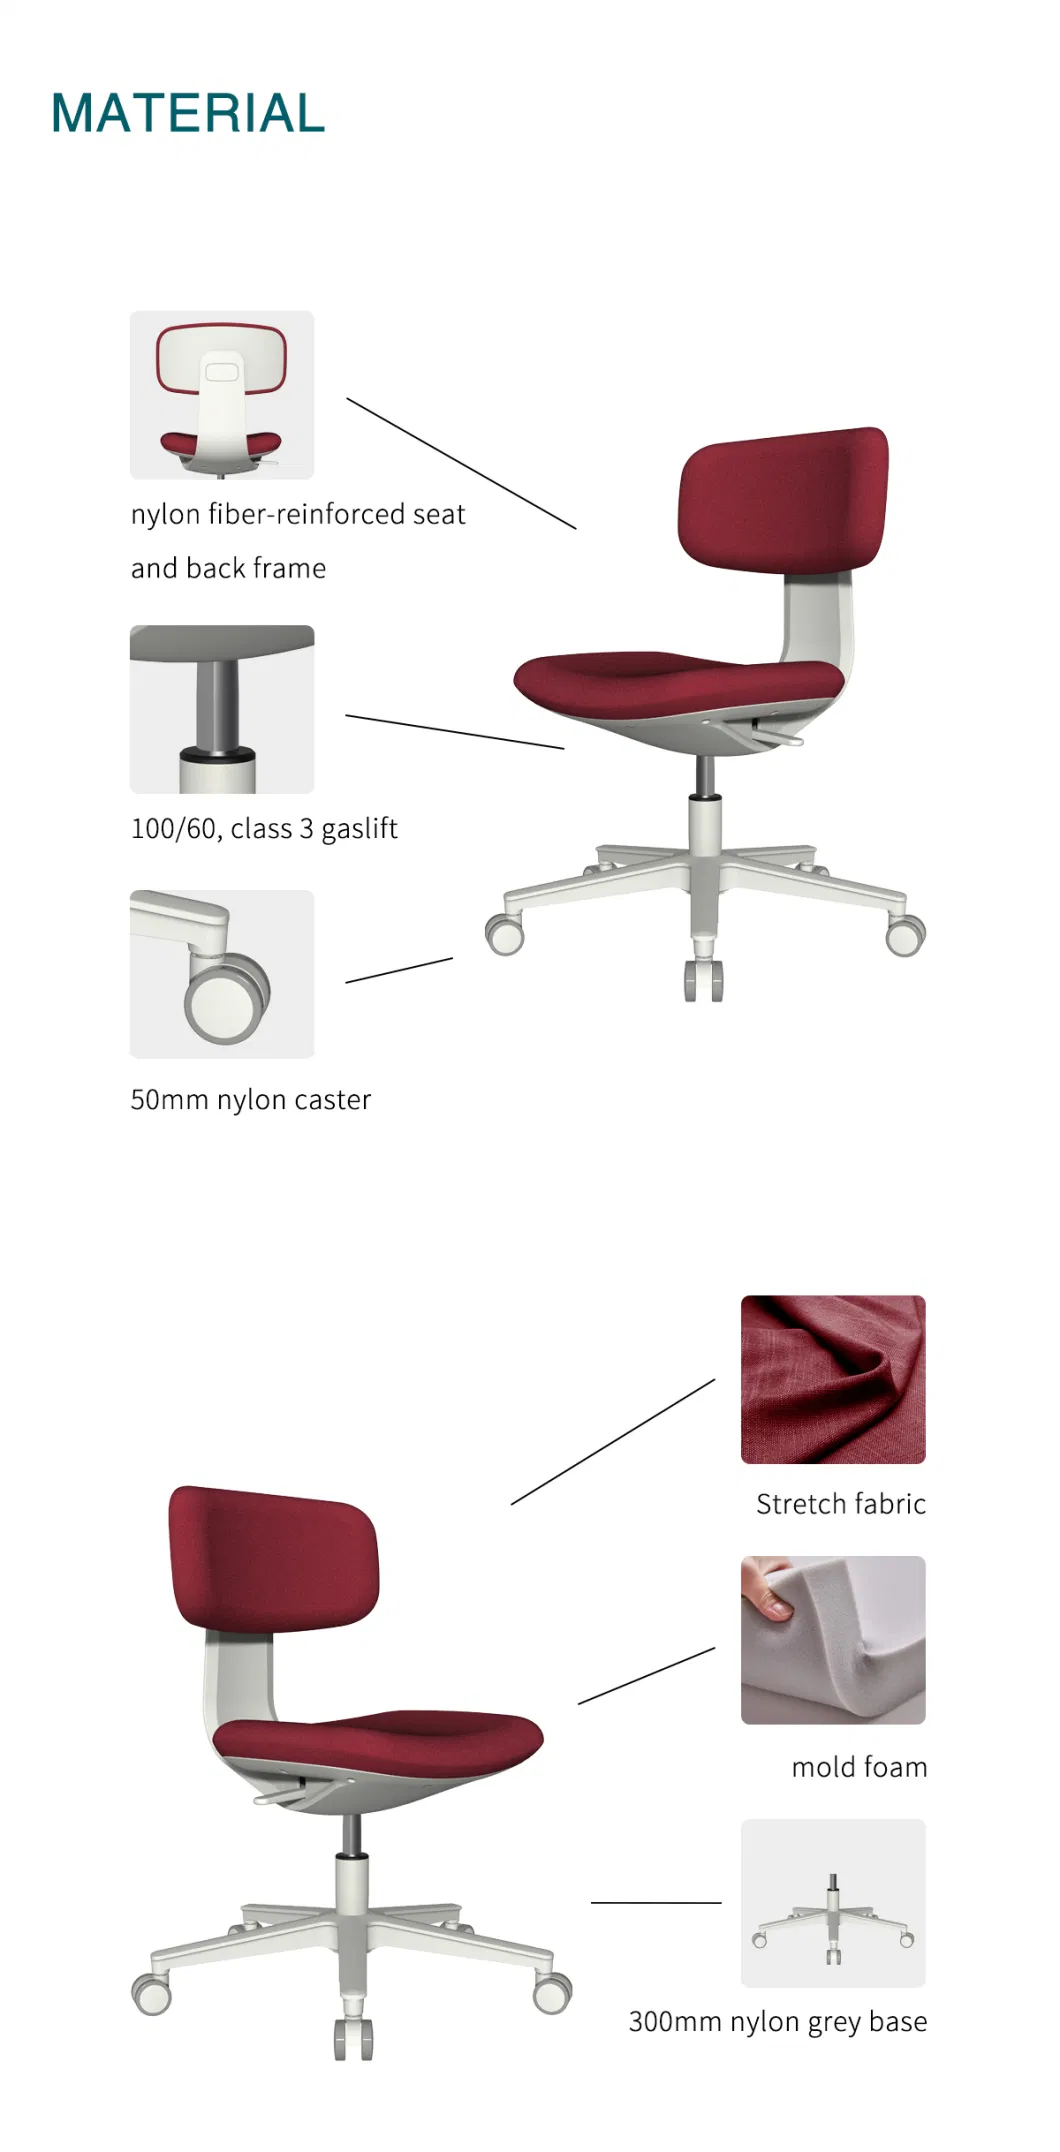 Small Size Waiting Chair Office Furniture Staff Chair Low Price Secretarial Chair Grey Cover Fabric Upholstery Chair